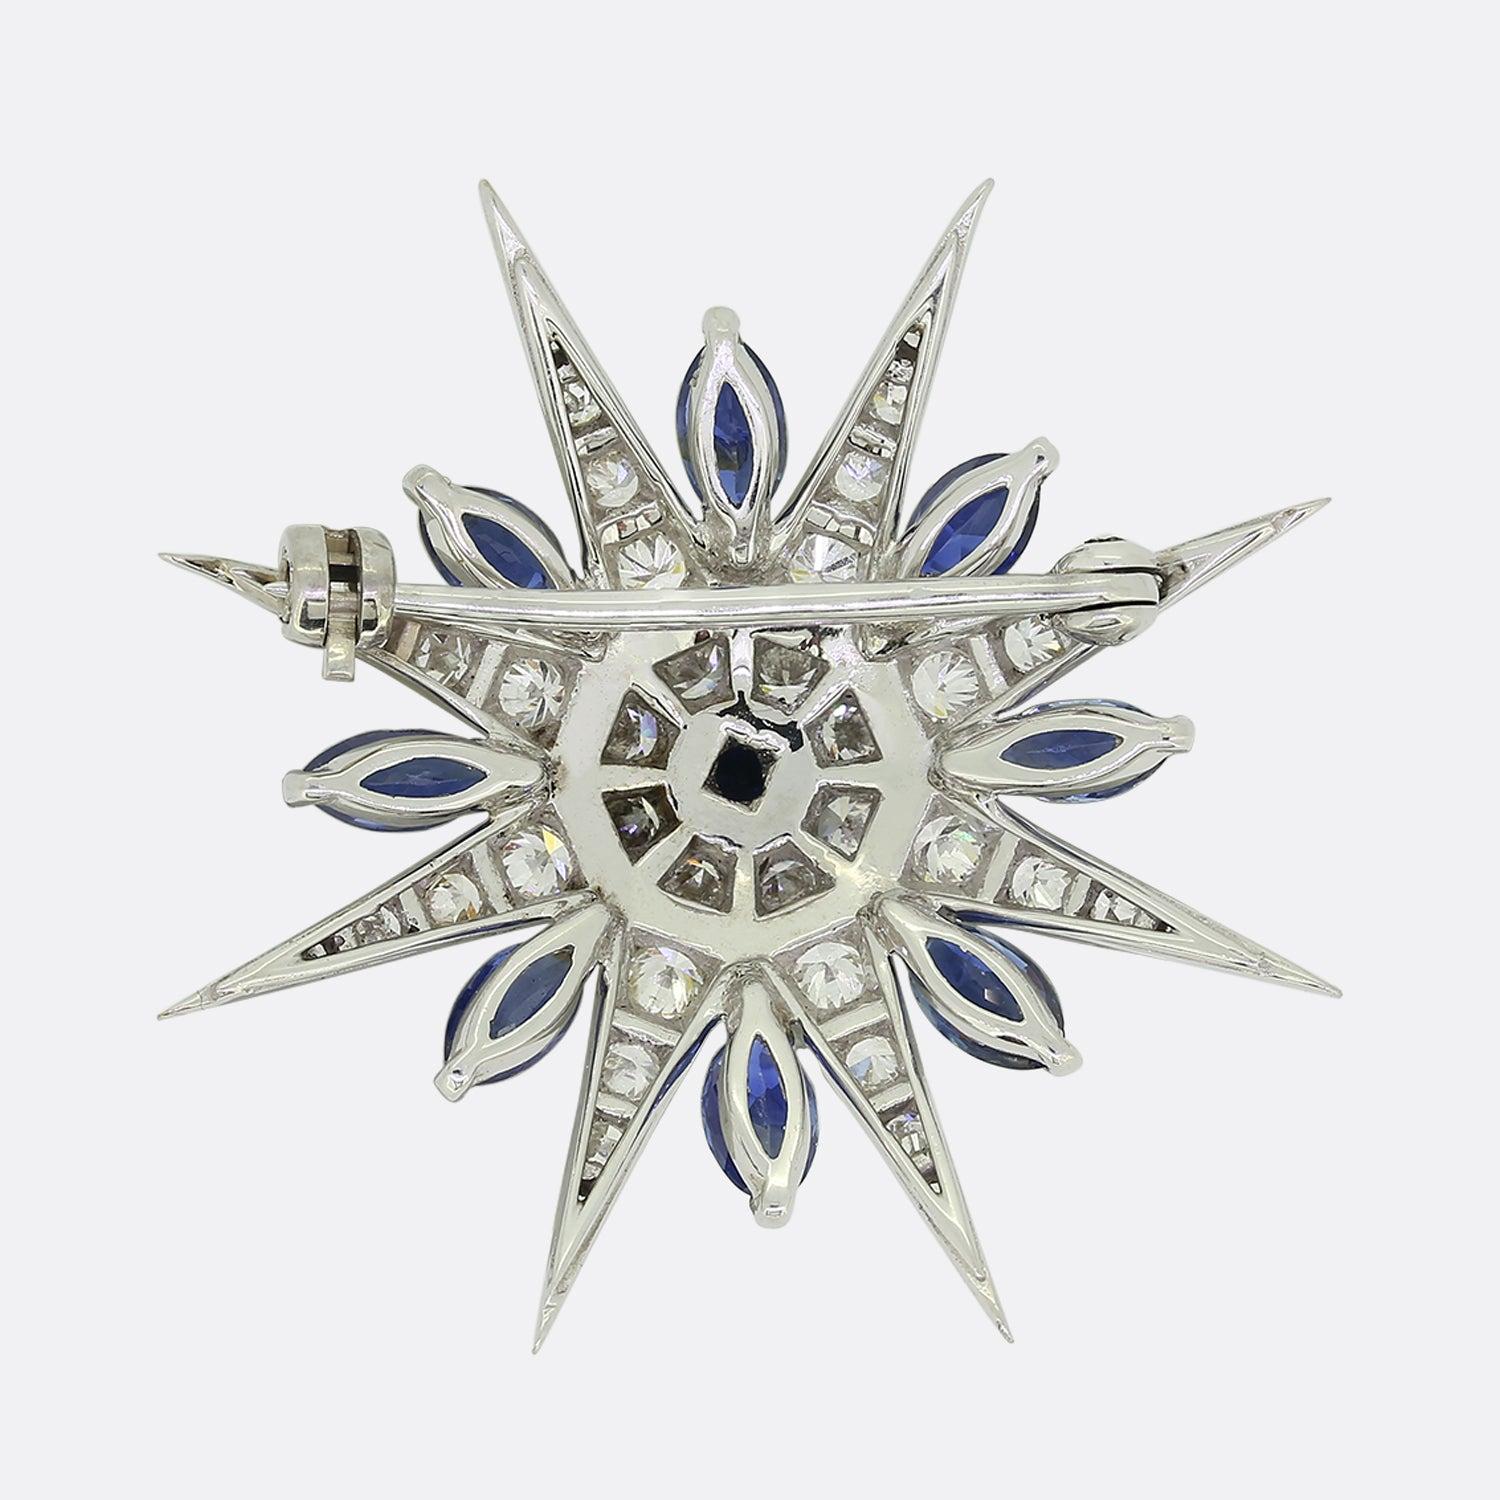 This is a wonderfully crafted sapphire and diamond star brooch. This eight pointed star plays host to a vast array of single and round brilliant cut diamonds; all of which are perfectly matched for colour and clarity. This piece really comes to life